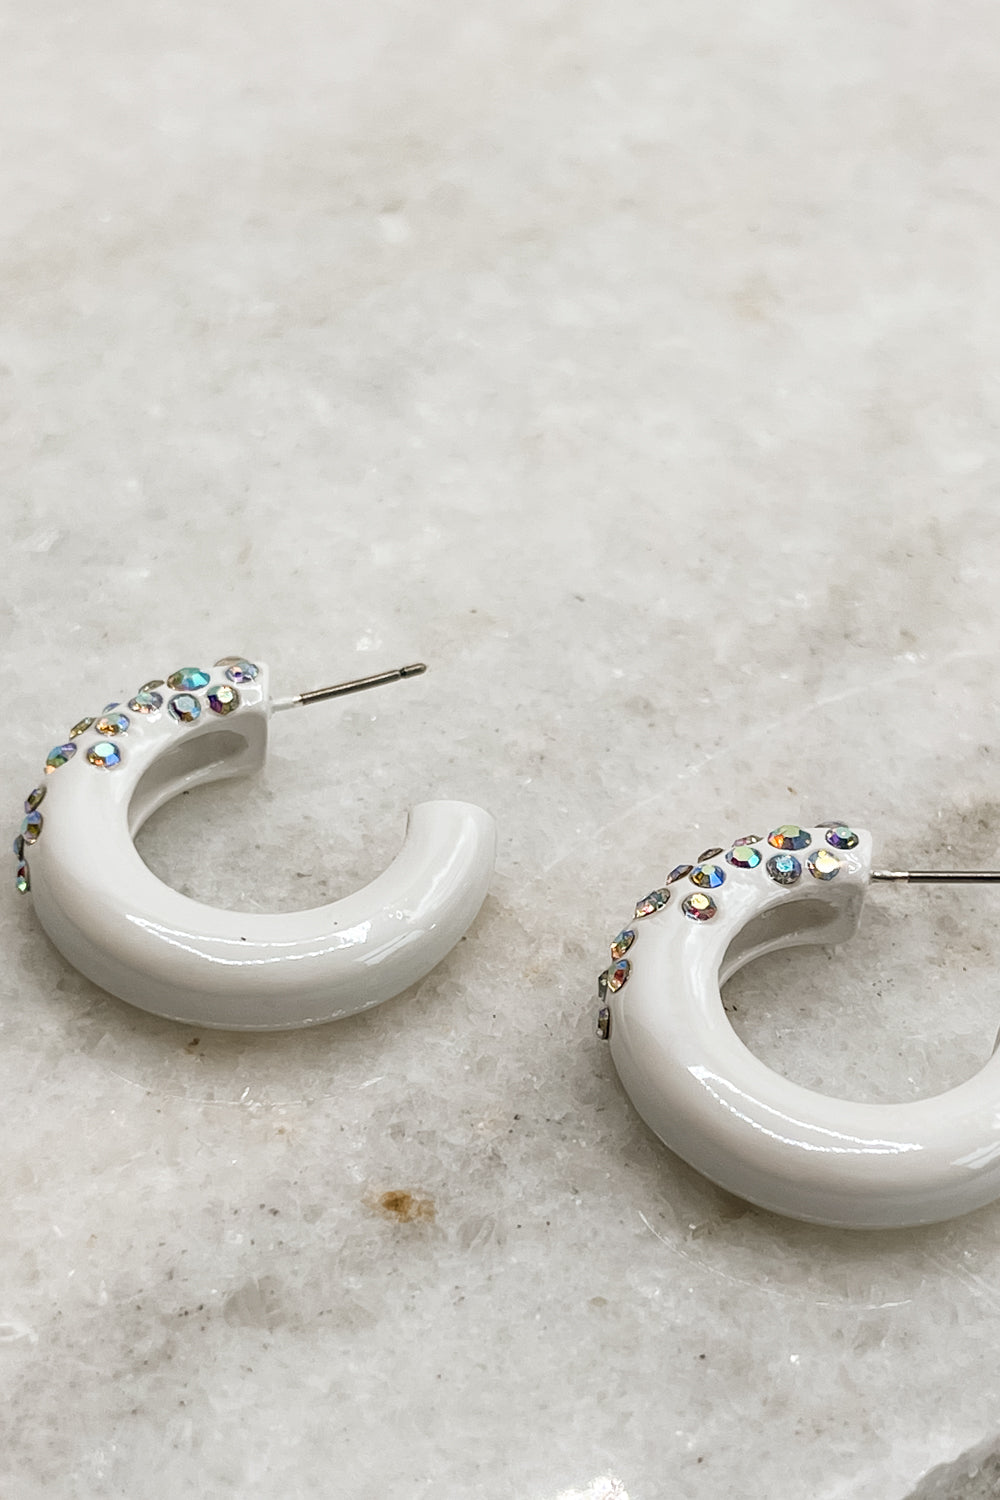 The Marisol Earrings are shown on a neutral background.